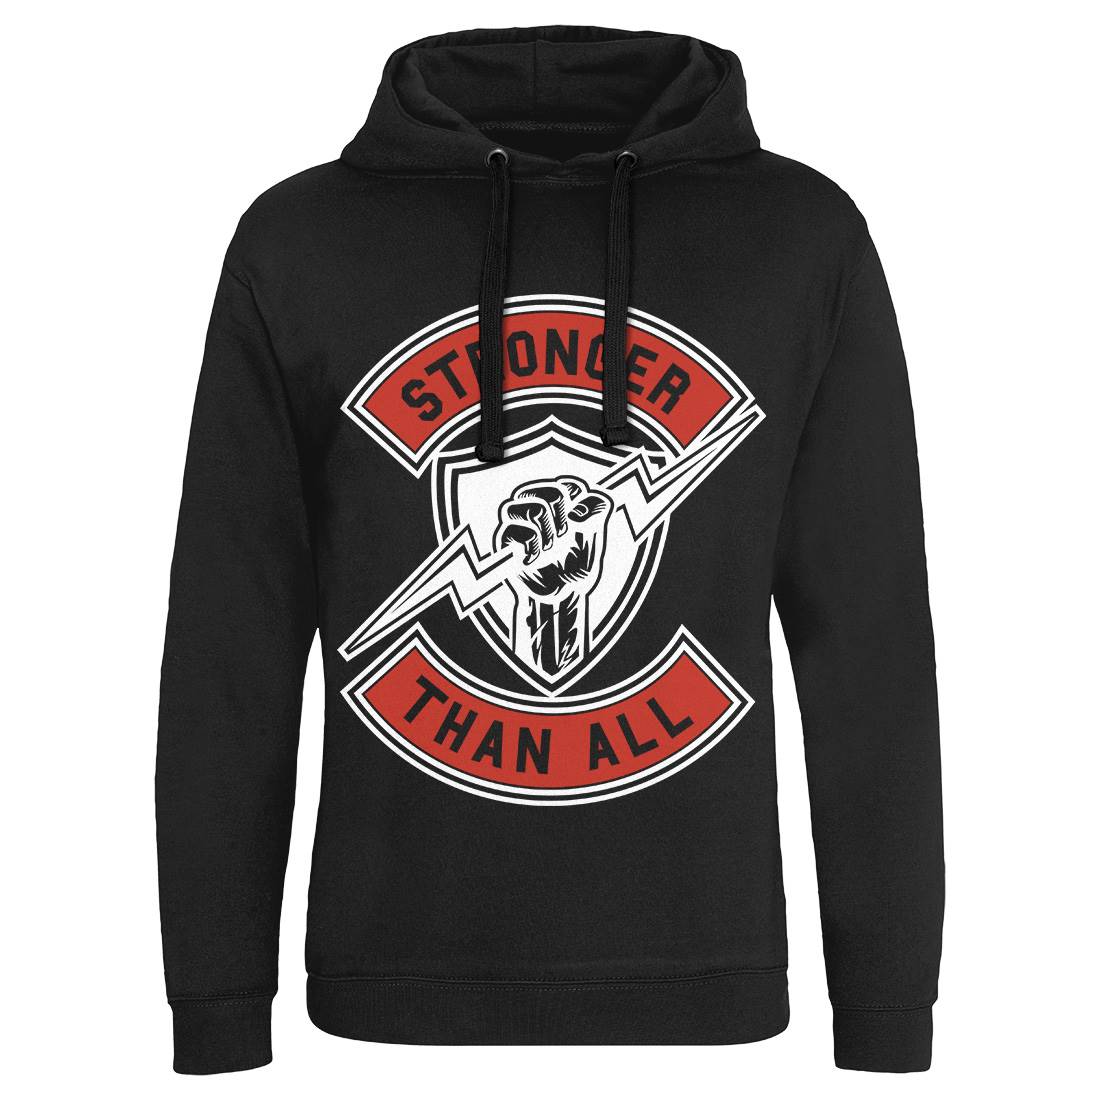 Stronger Than All Mens Hoodie Without Pocket Gym A290